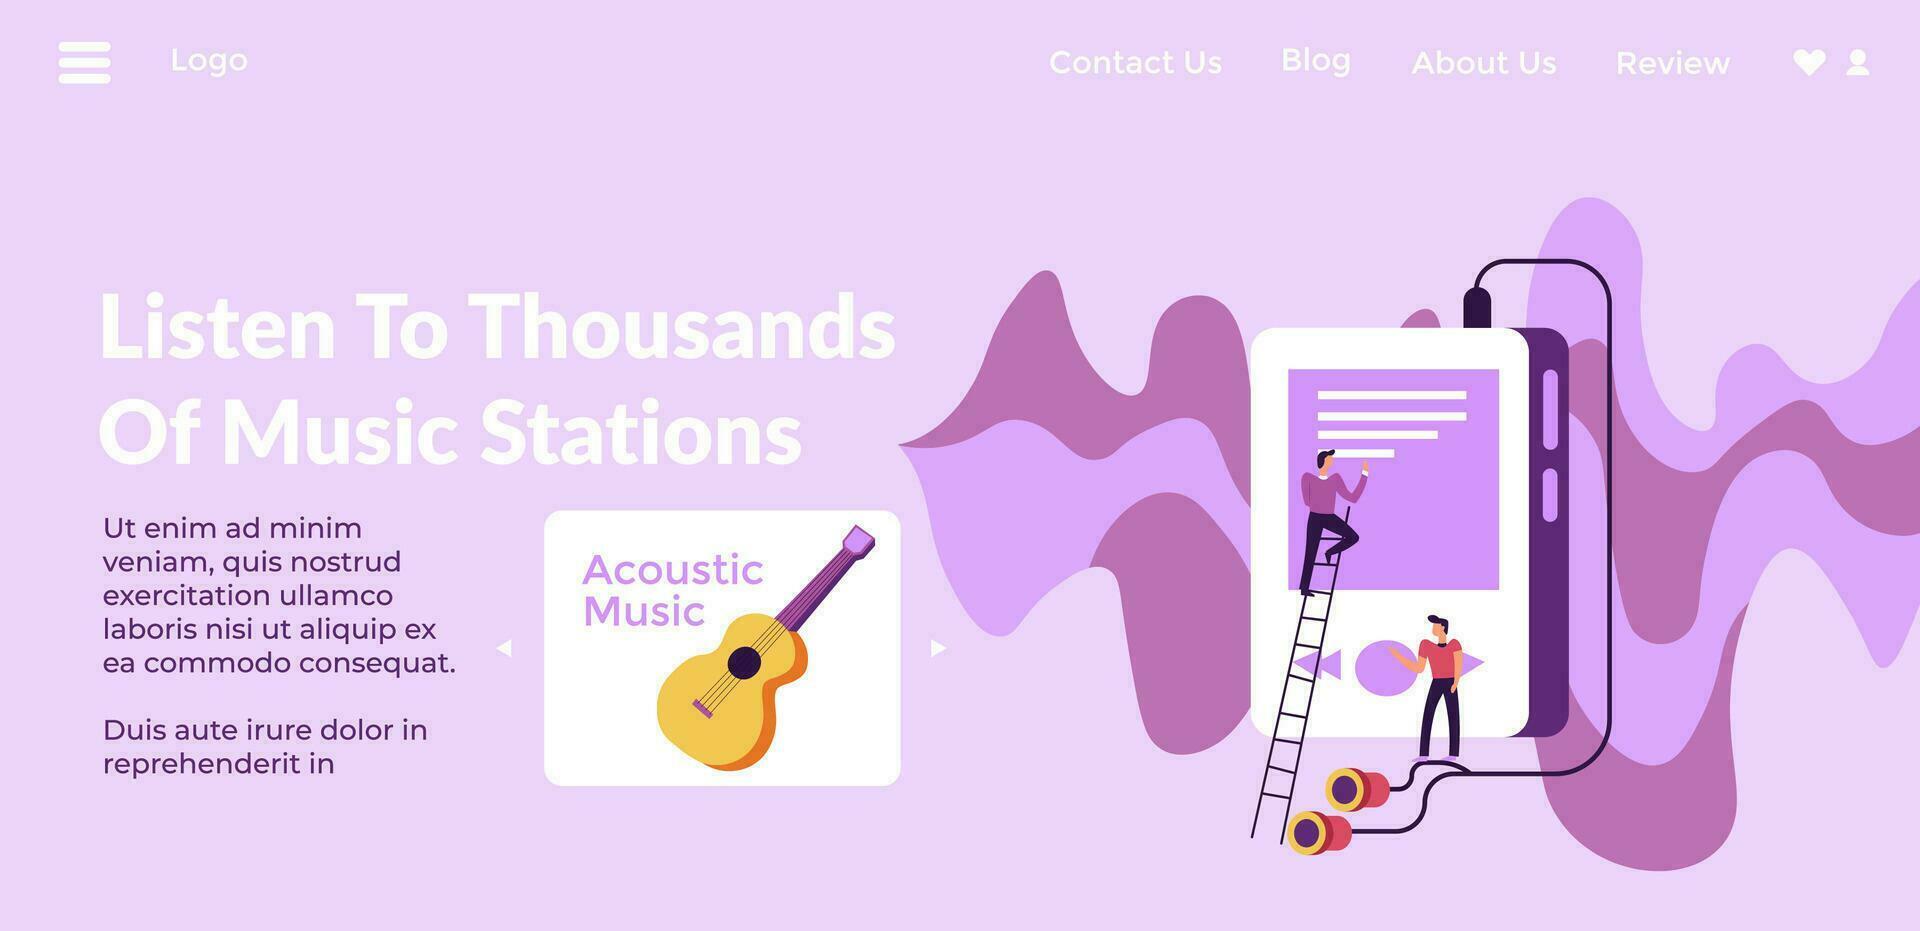 Listen to thousands of music stations website vector